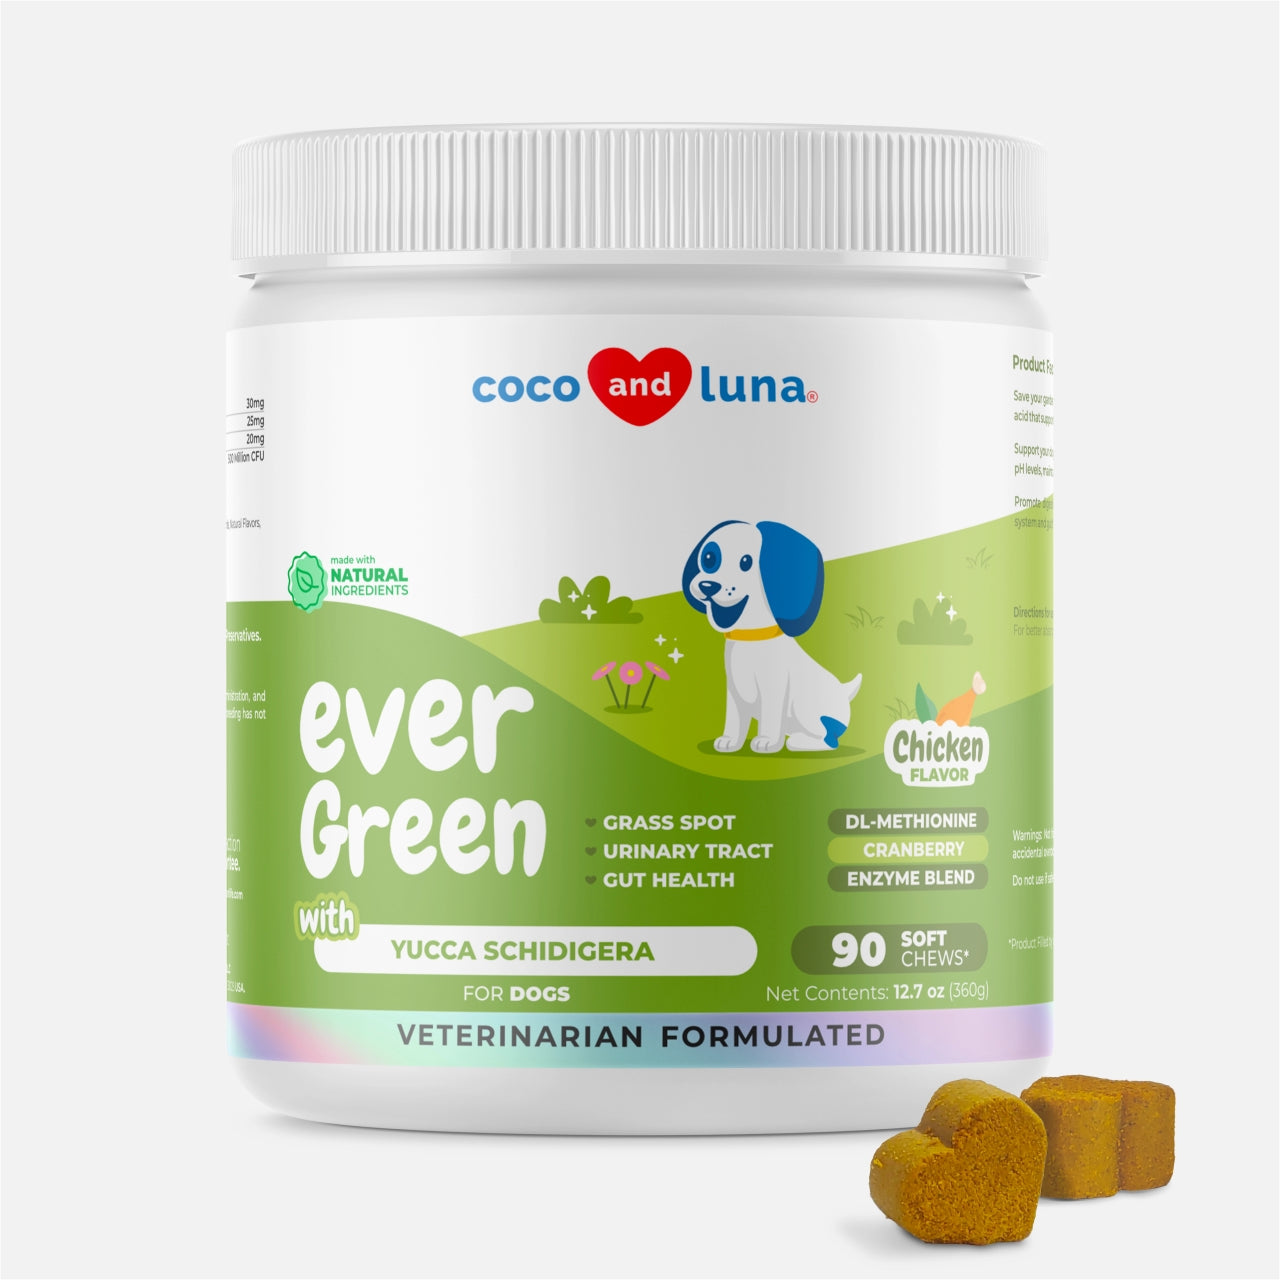 Ever Green - Grass Burn Spots Chews for Dogs - 90 Soft Chews - Coco and Luna